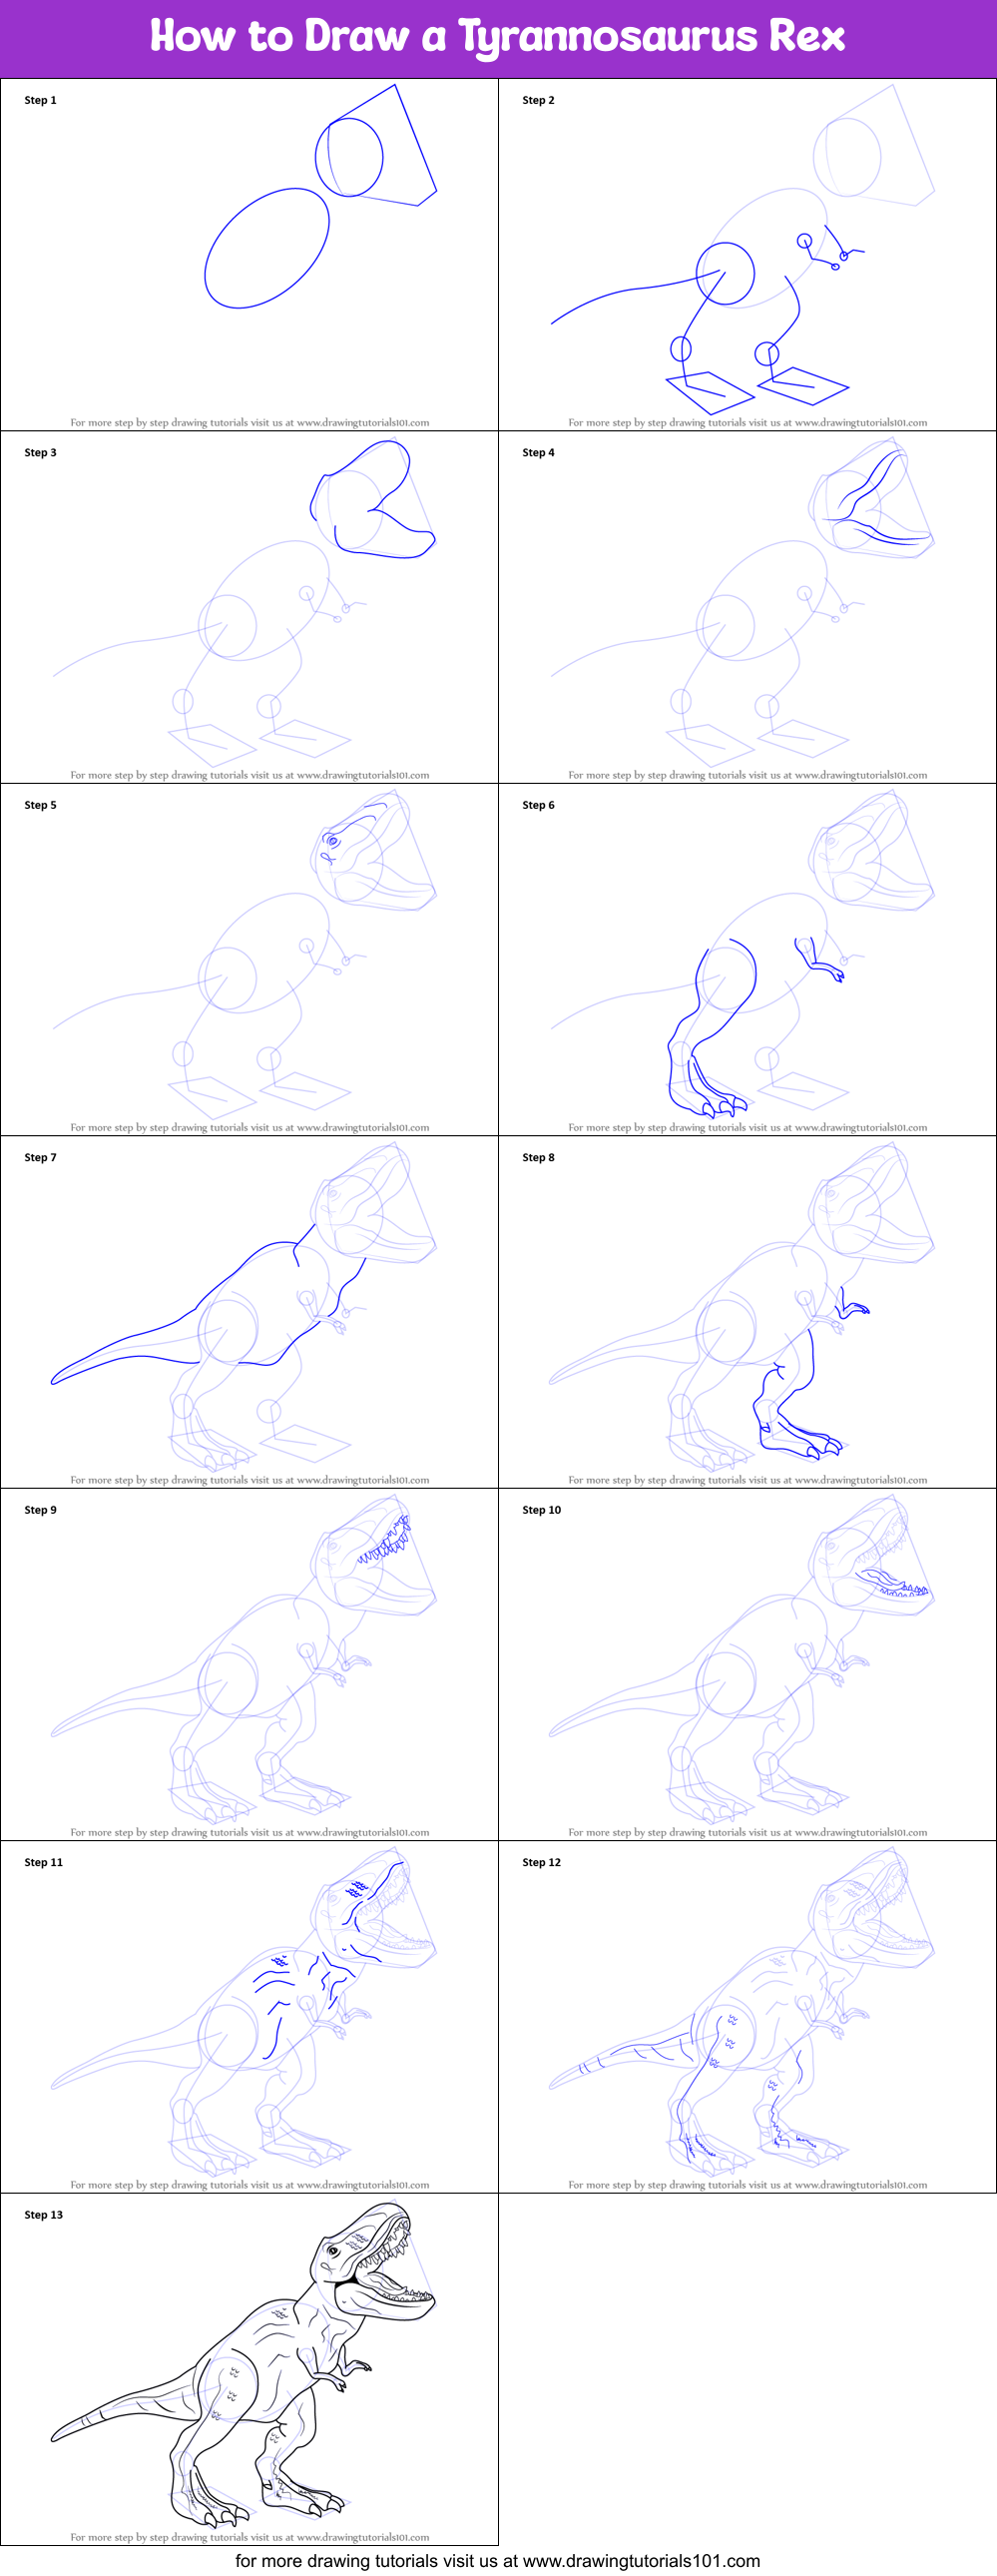 How to Draw a Tyrannosaurus Rex printable step by step drawing sheet